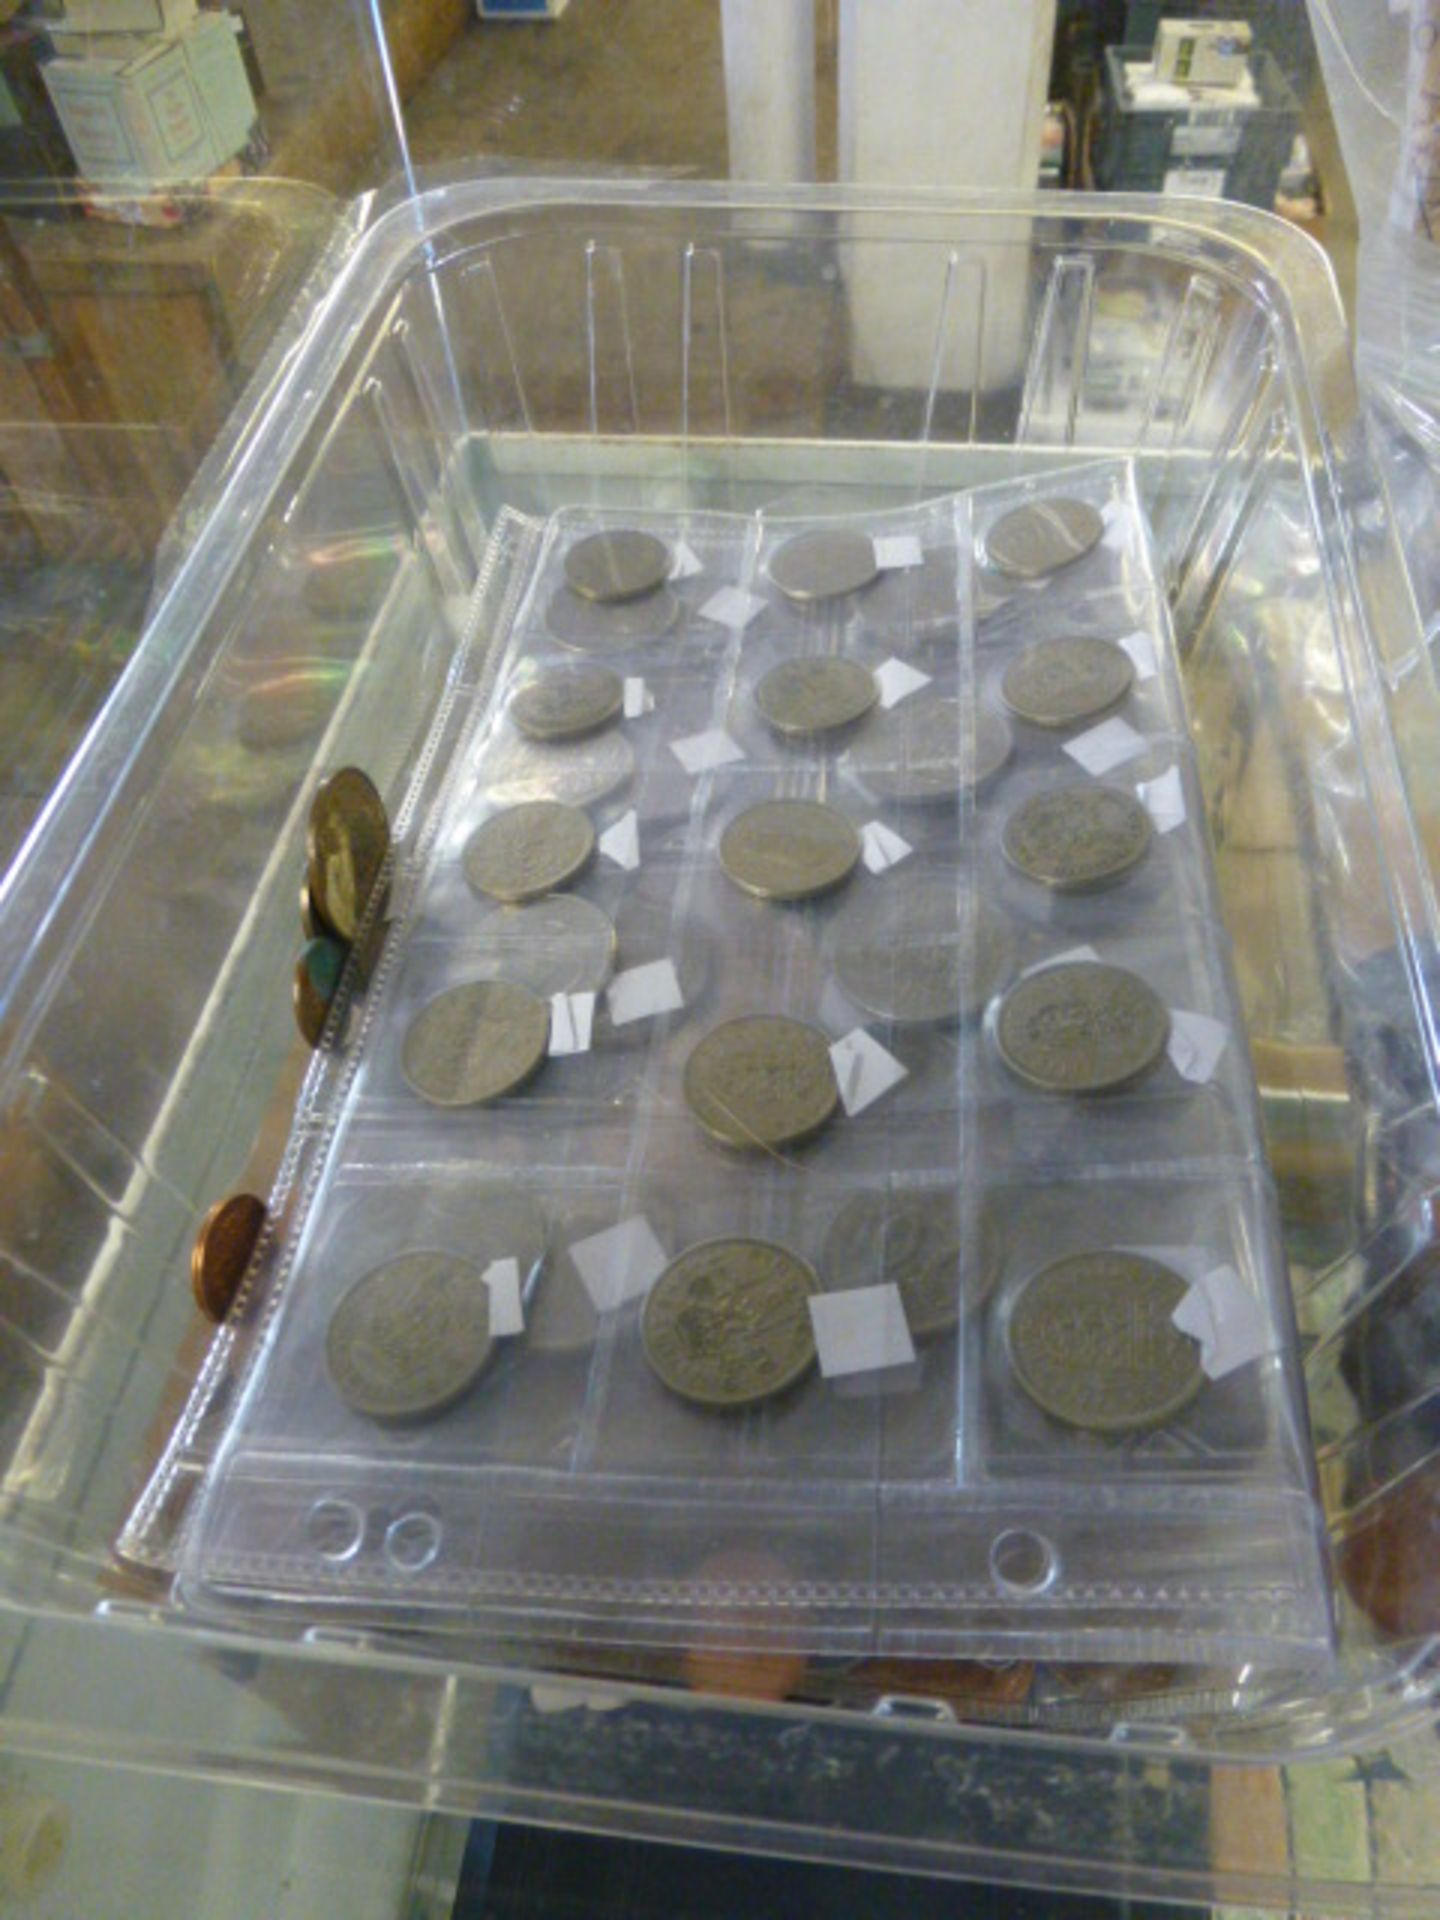 Tub of various coins and bank notes